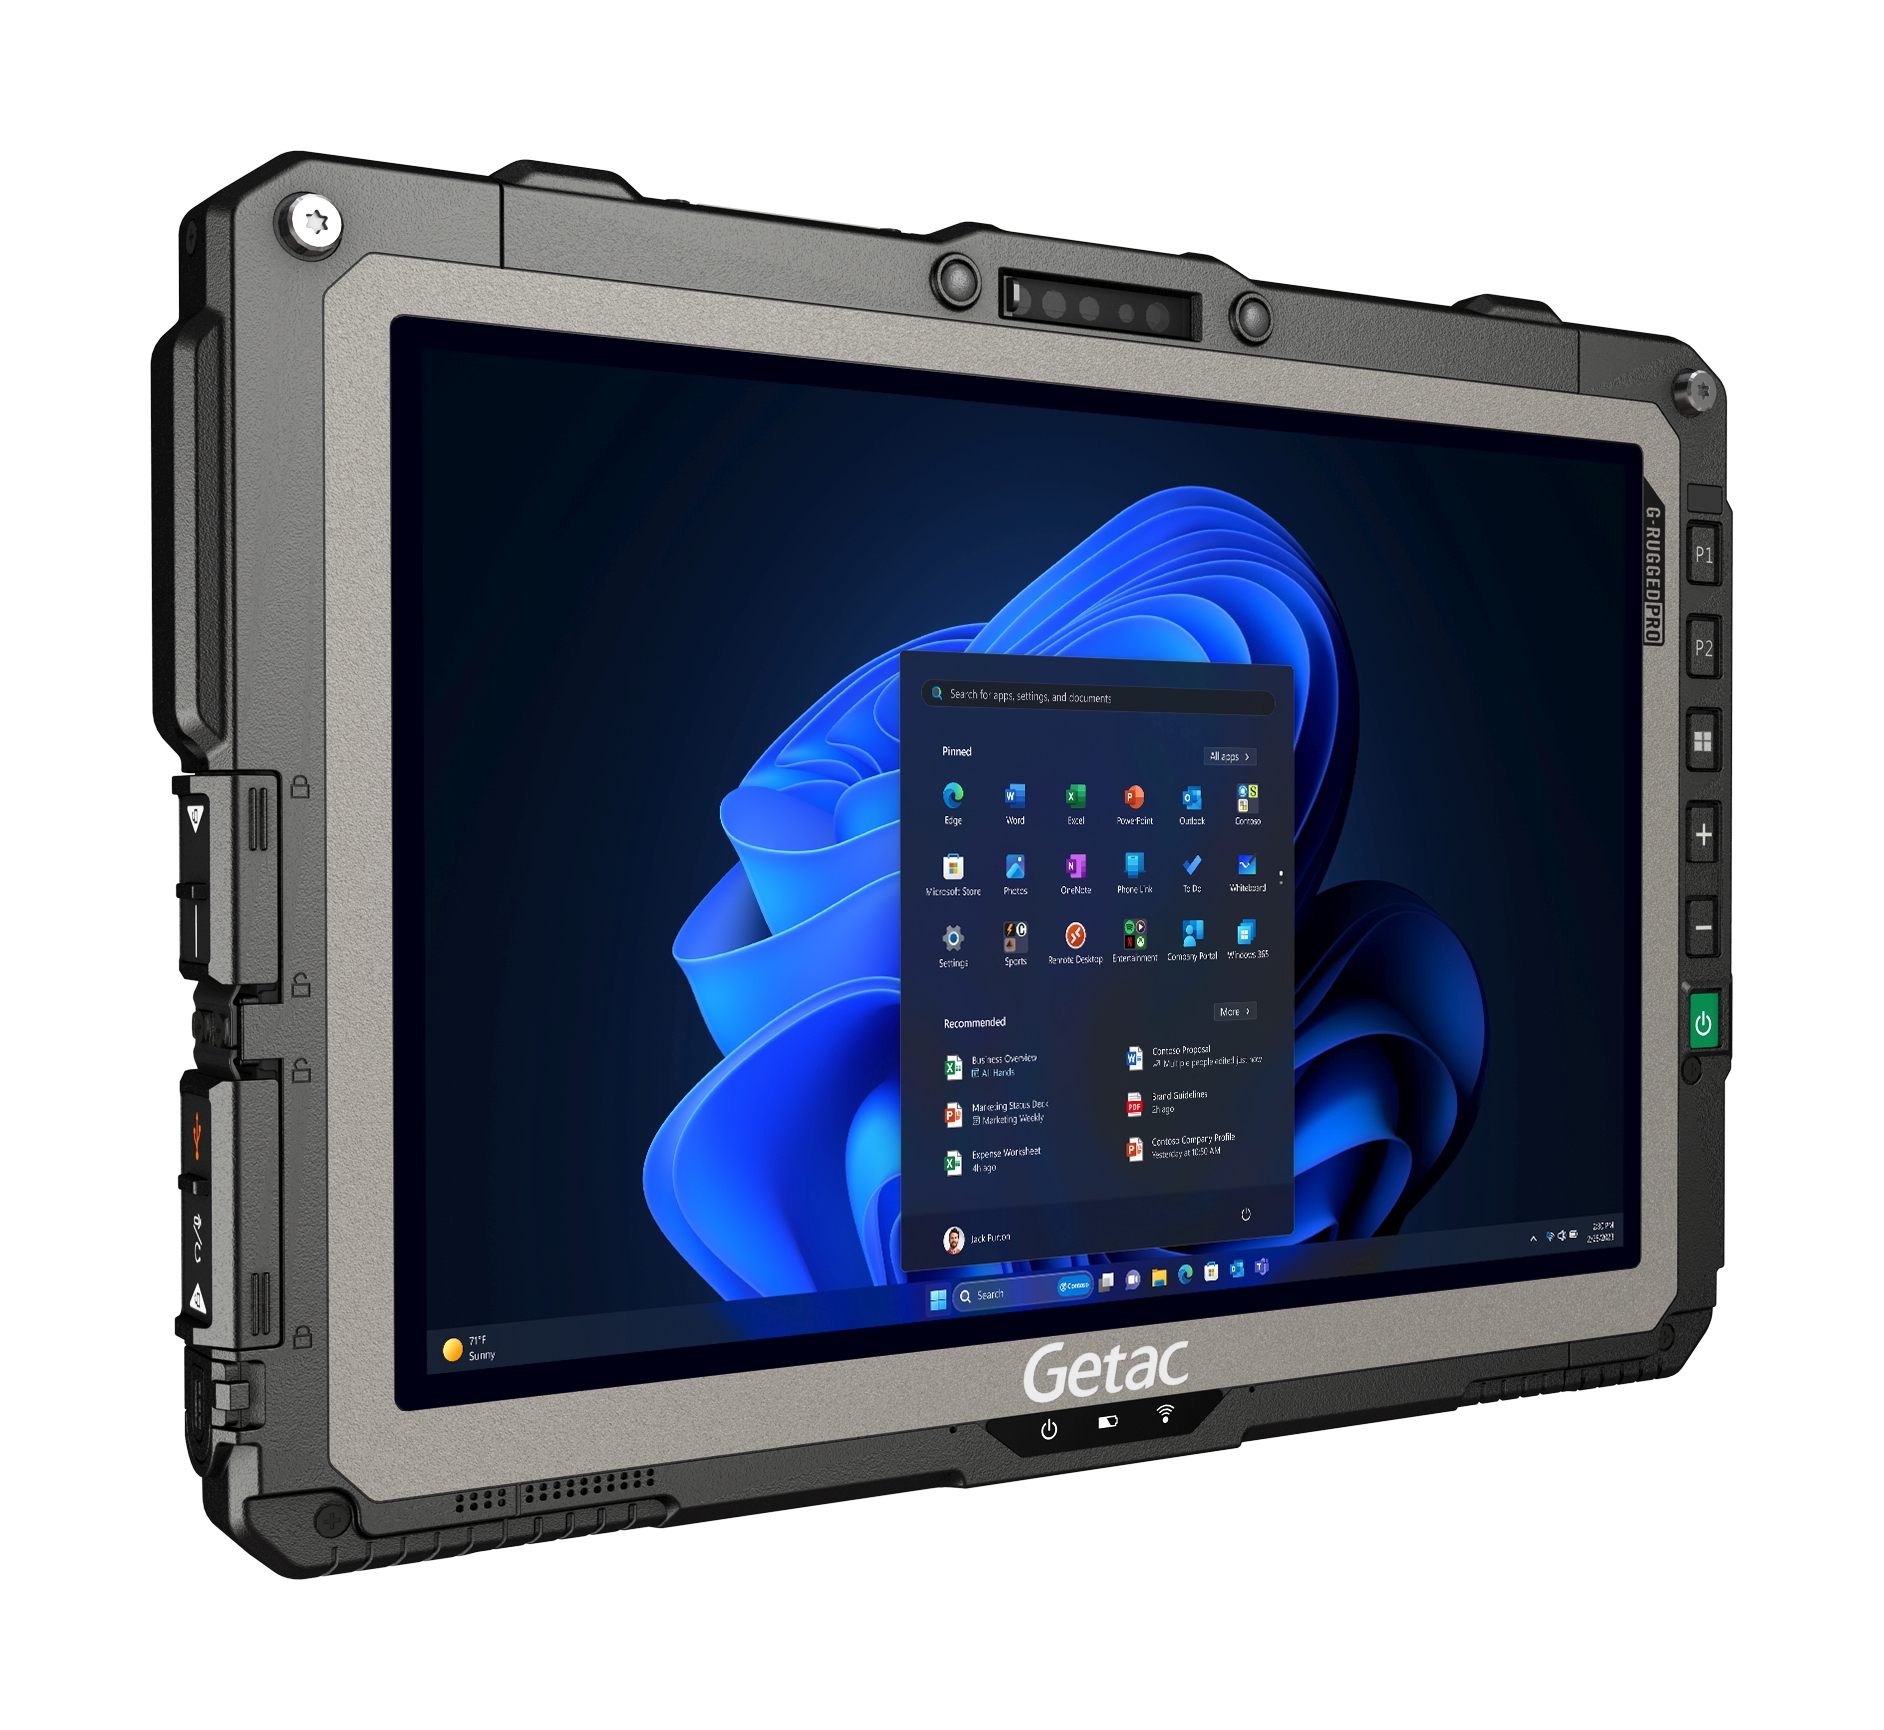 Getac UX10 G3 Fully Rugged Windows 11 Pro Tablet with 10.1